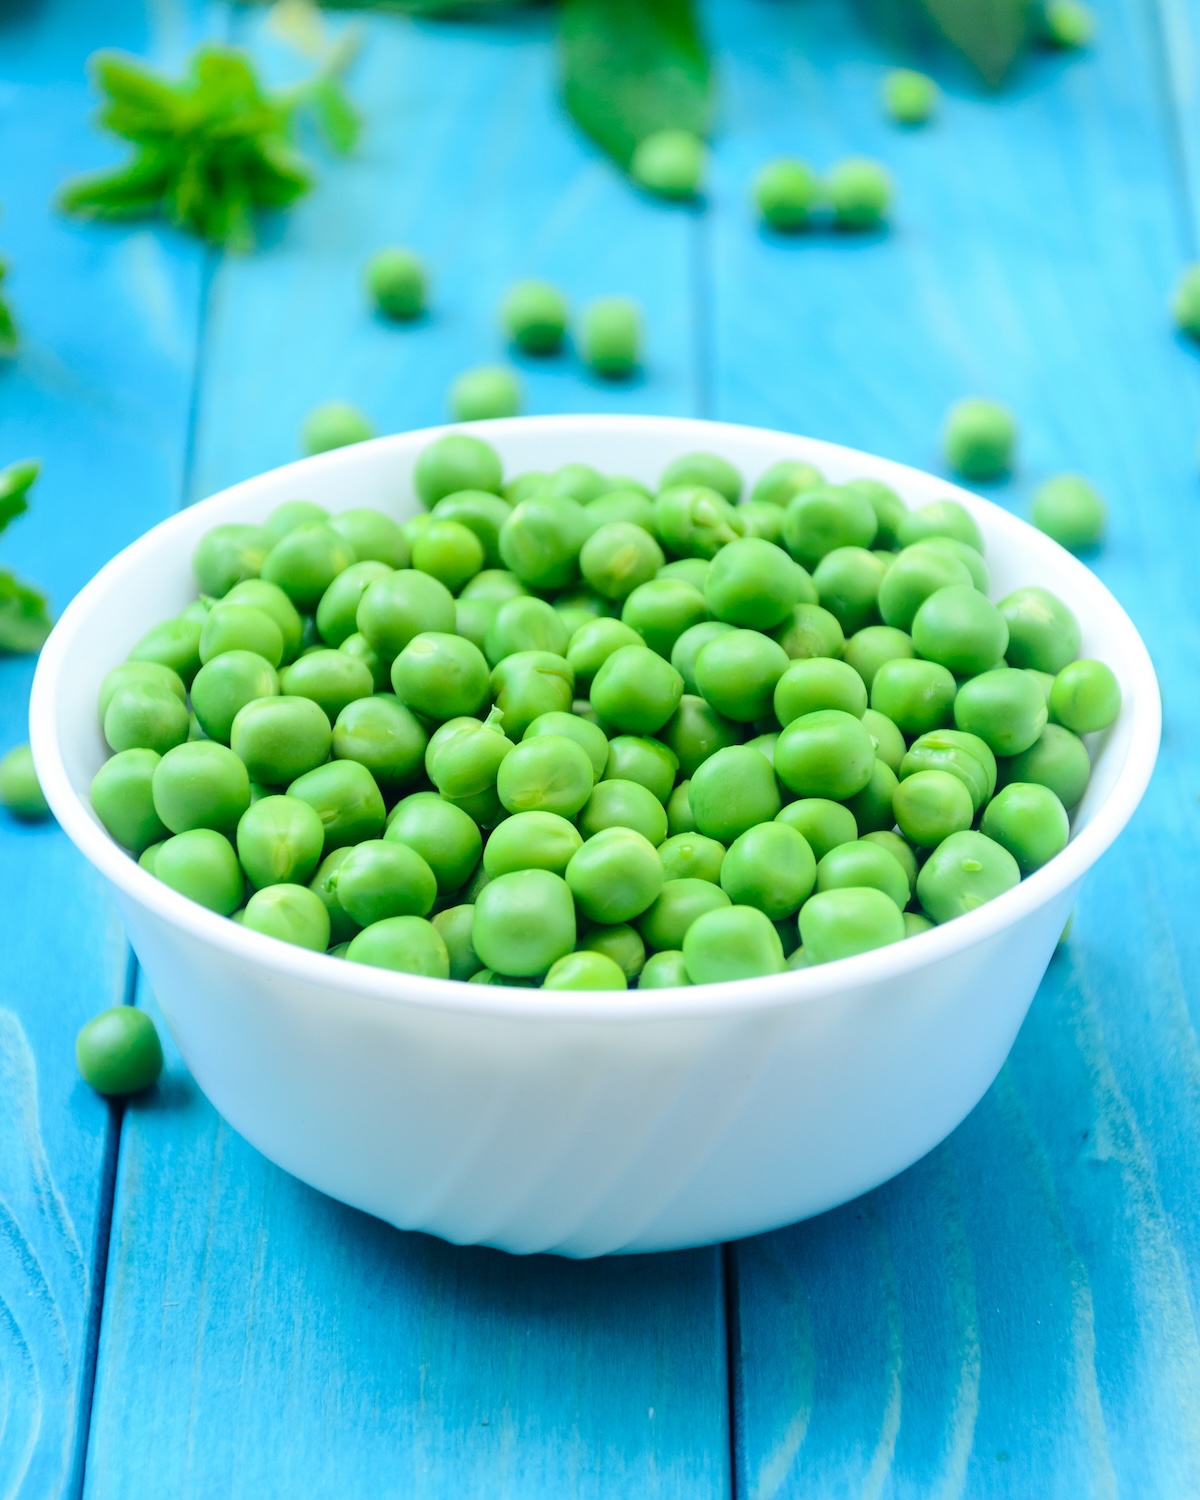 RAW baby peas in small white bowl, over colorful turquoise blue painted wooden boards. Close-up